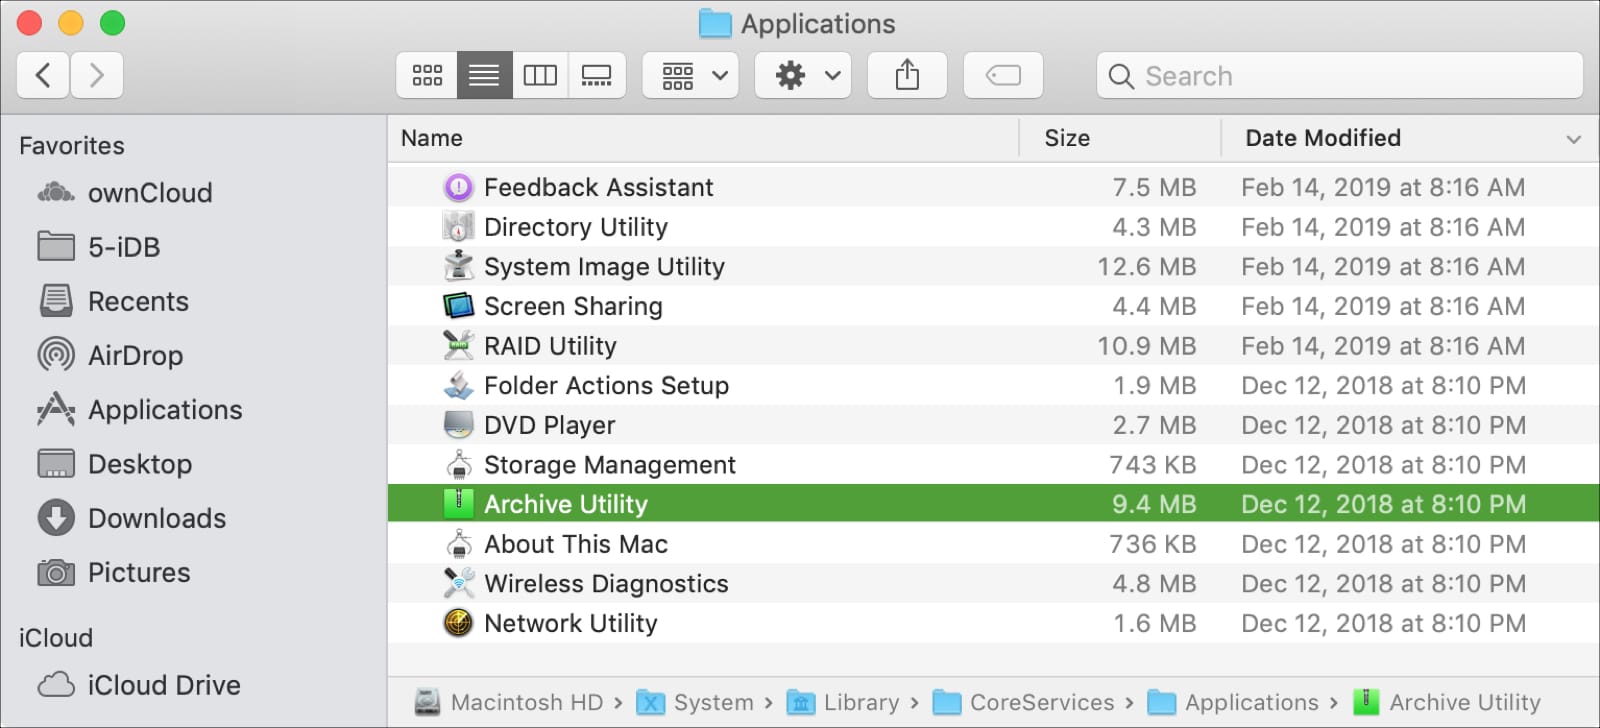 Archive utility for mac download free download